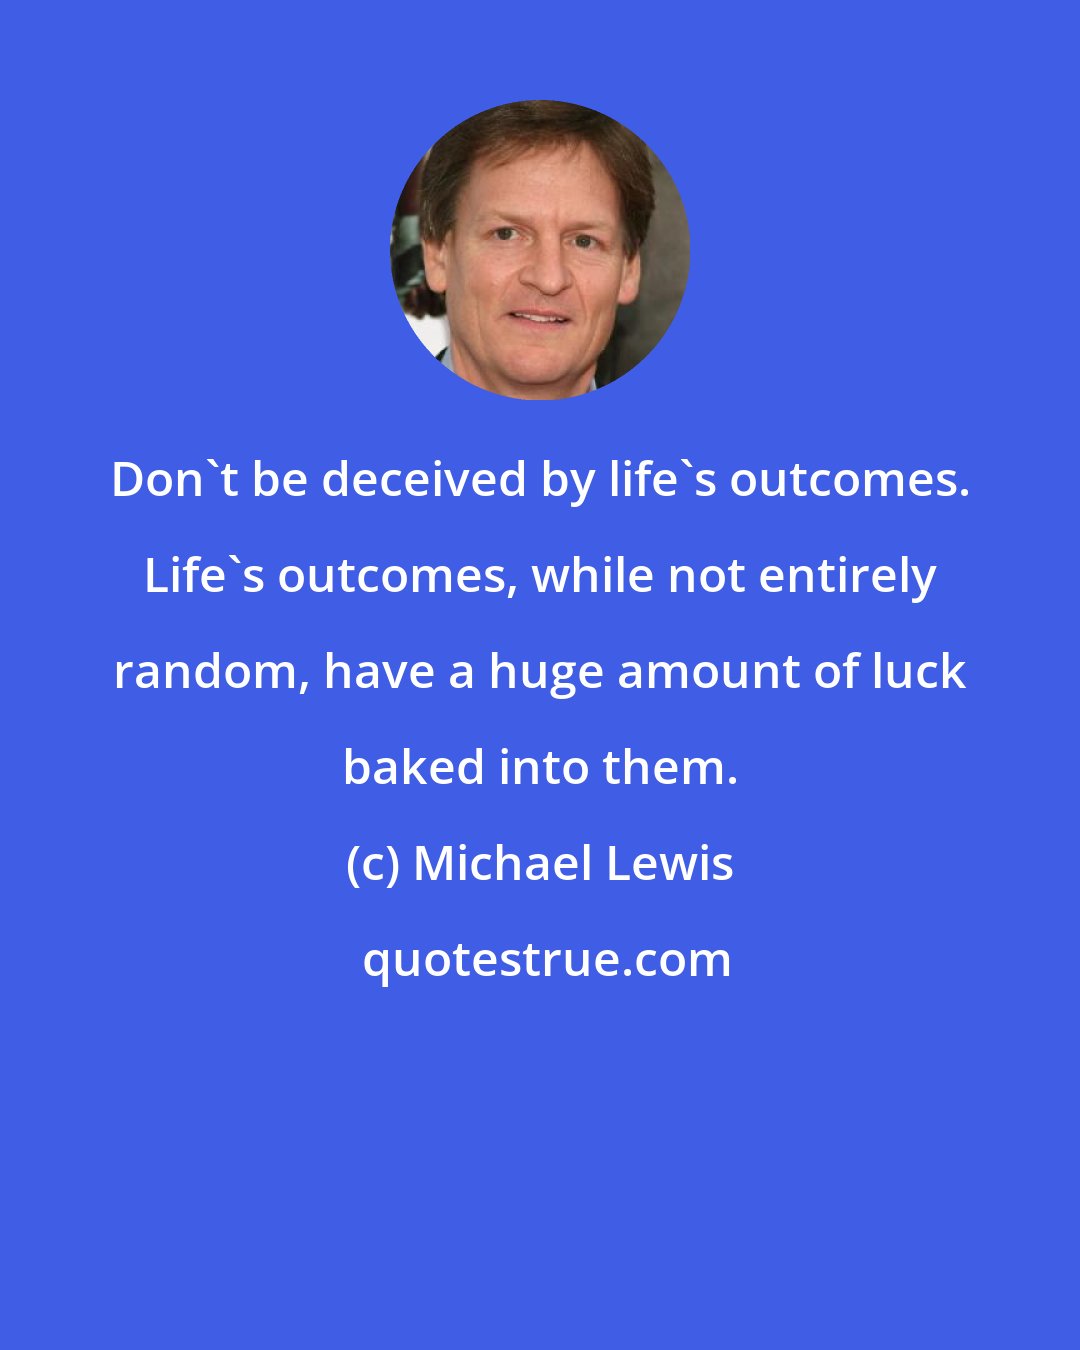 Michael Lewis: Don't be deceived by life's outcomes. Life's outcomes, while not entirely random, have a huge amount of luck baked into them.